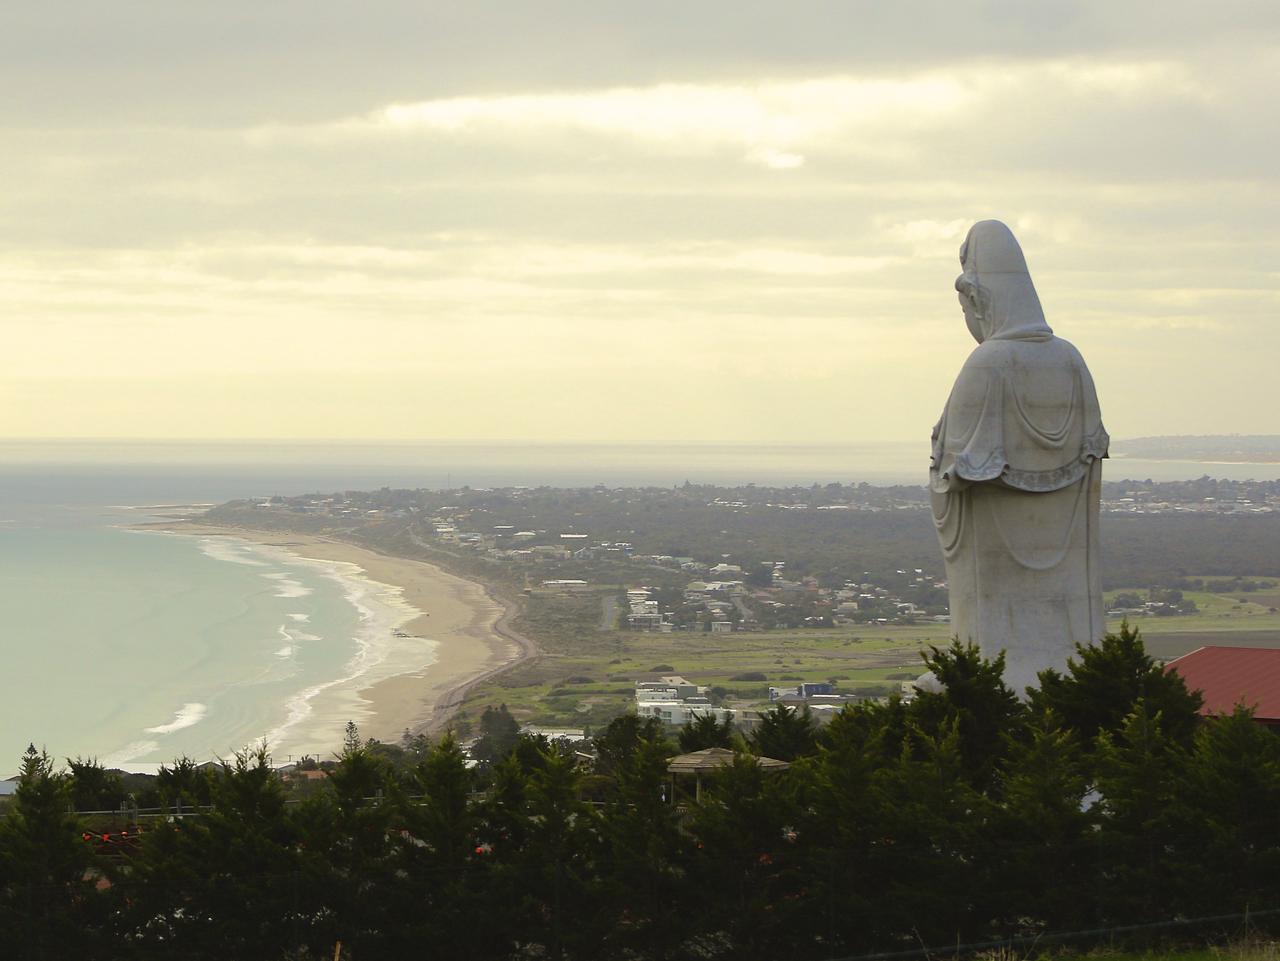 SUNDAY ESCAPE. GREAT AUSSIE DETOUR. Giant Buddha Statue, Sellicks Hill, South Australia. MUST CREDIT: Greg Scales / Flickr